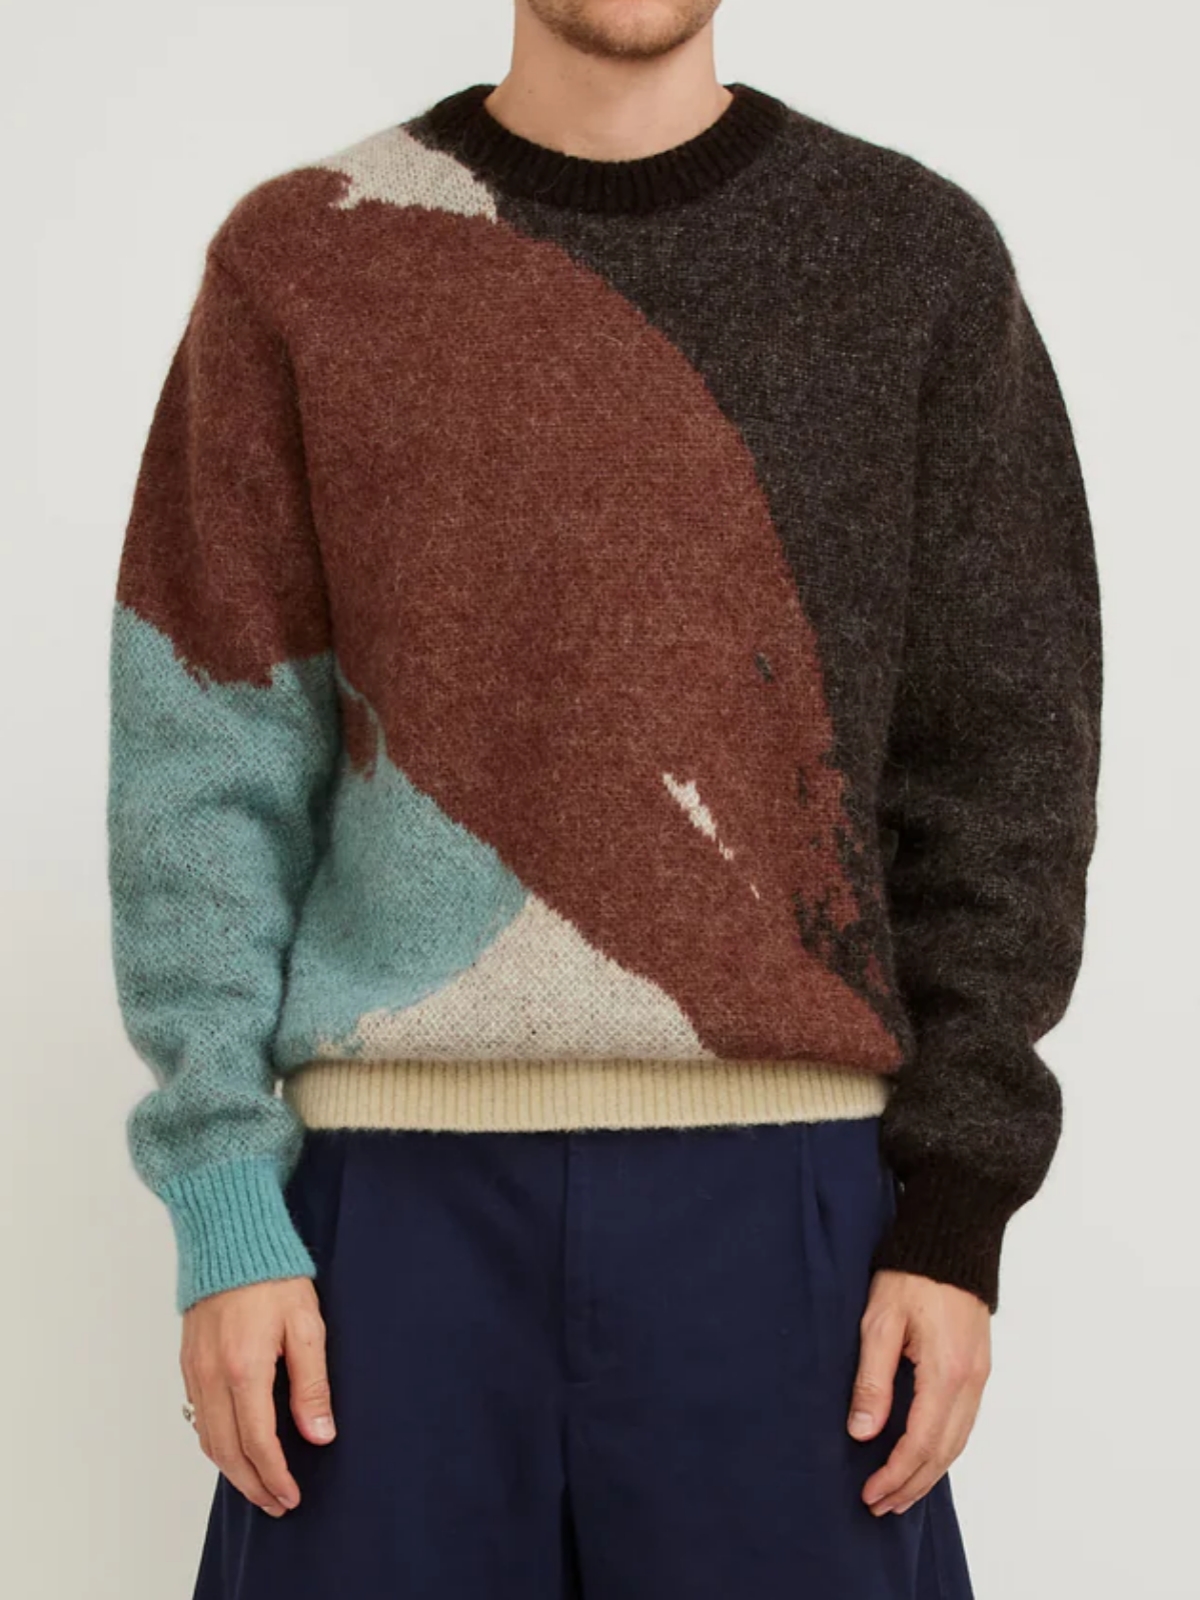 mens jumpers